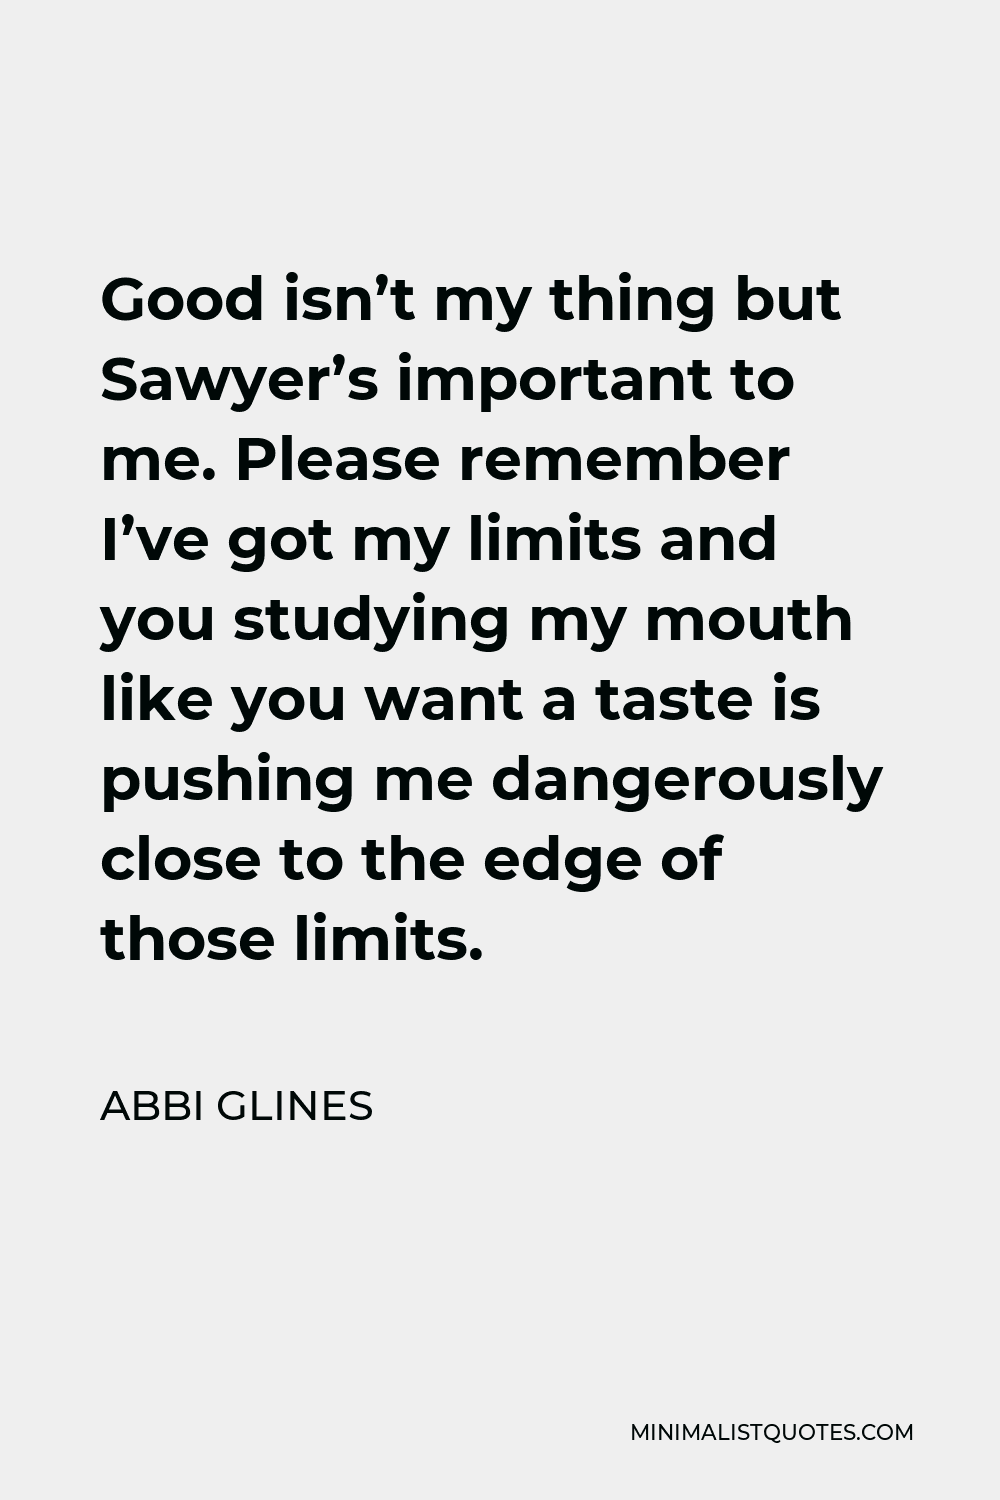 Abbi Glines Quote - Good isn’t my thing but Sawyer’s important to me. Please remember I’ve got my limits and you studying my mouth like you want a taste is pushing me dangerously close to the edge of those limits.